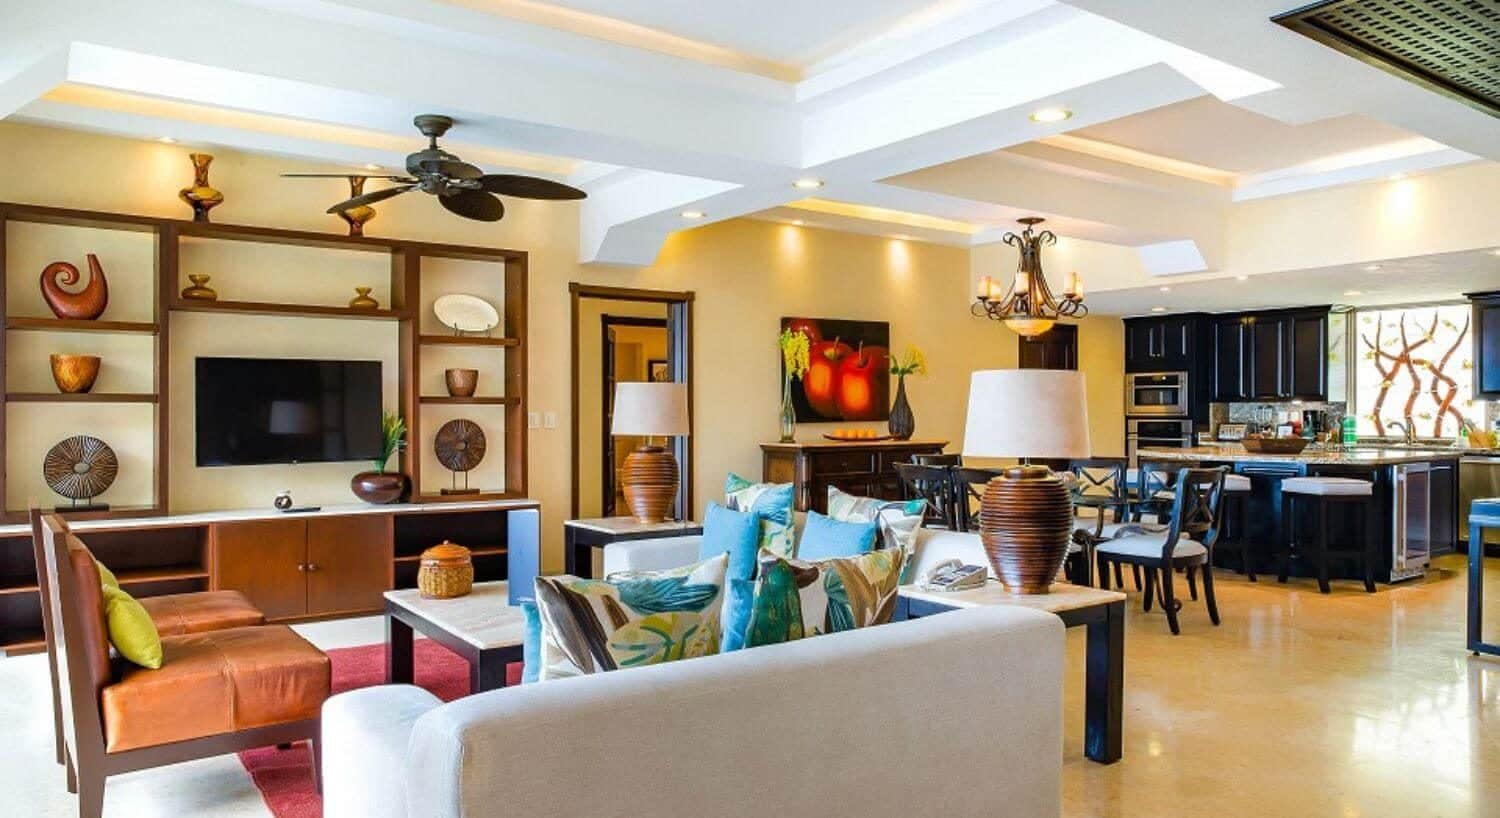 A large open room with a living area with plush white, blue and orange living furniture, a dining area, and kitchen.